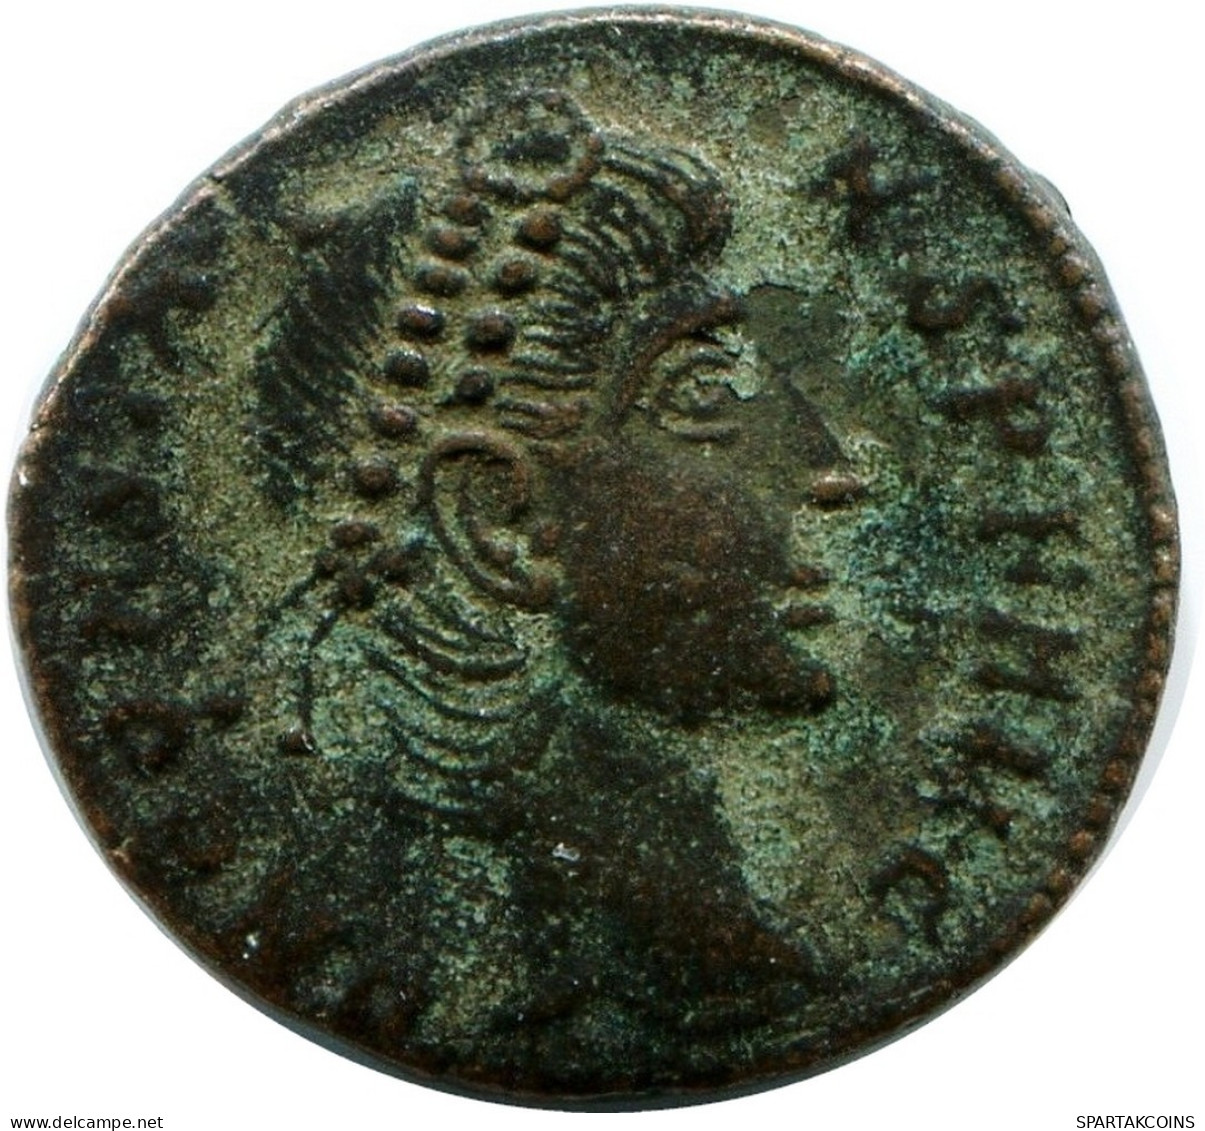 CONSTANS MINTED IN NICOMEDIA FOUND IN IHNASYAH HOARD EGYPT #ANC11755.14.E.A - The Christian Empire (307 AD Tot 363 AD)